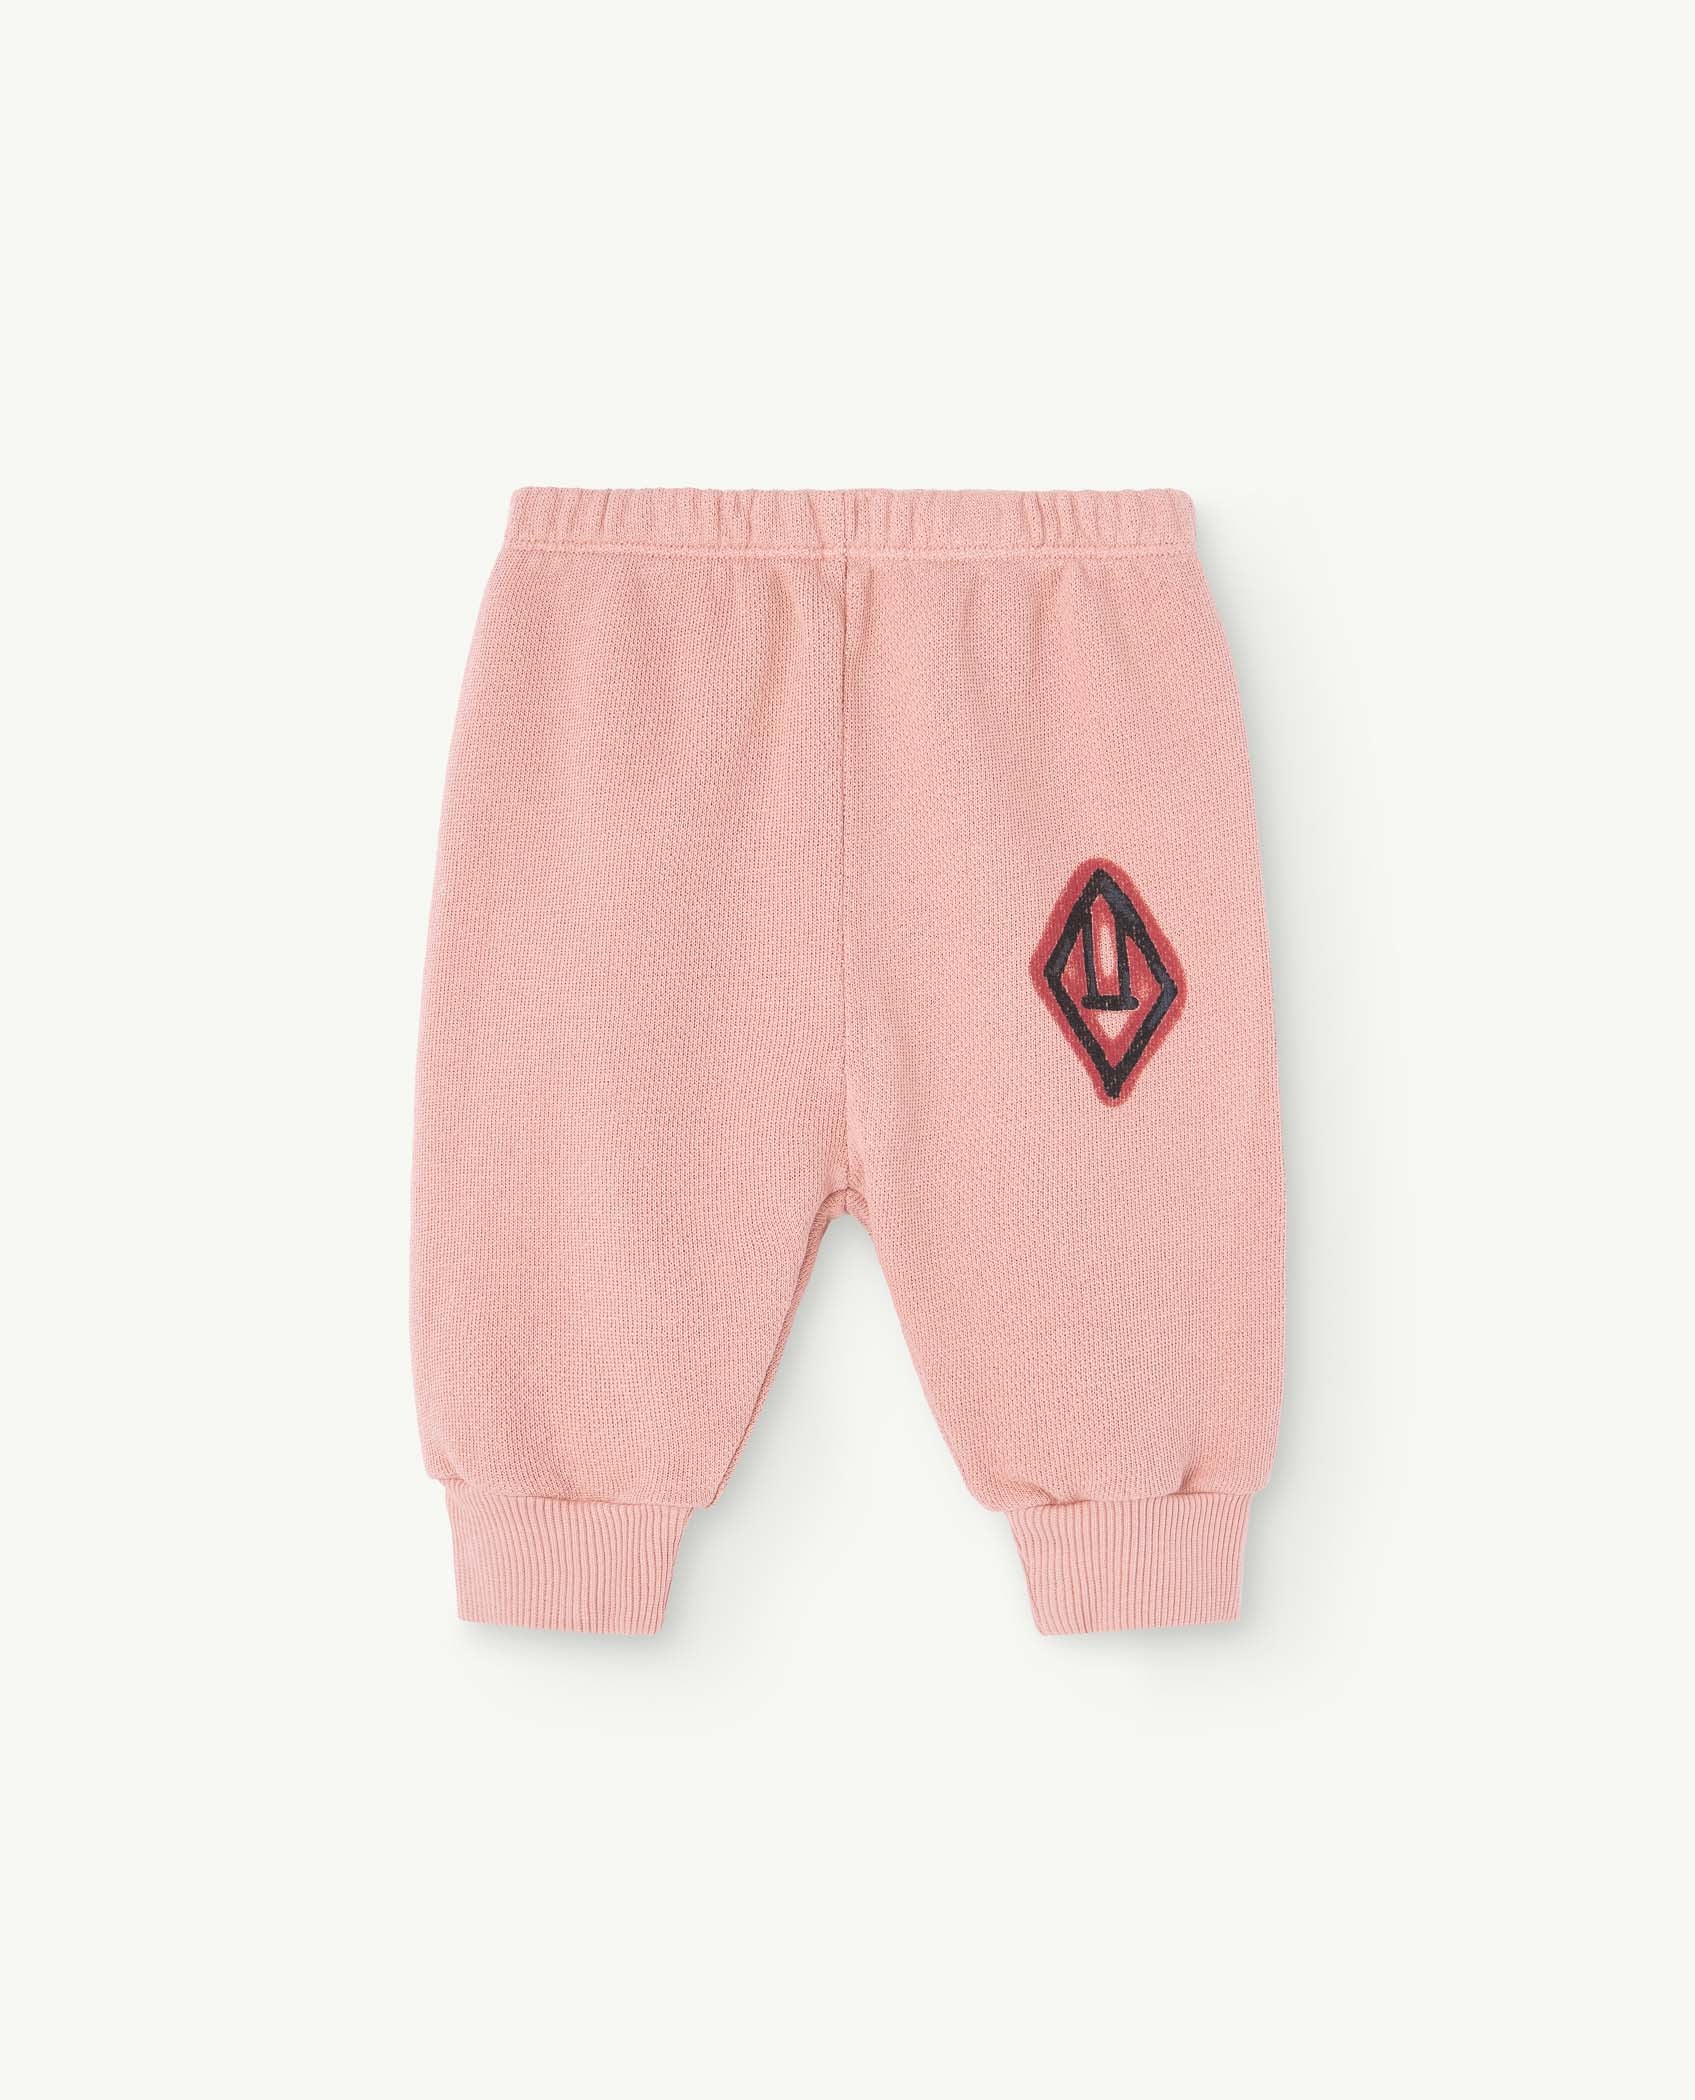 The animals Observatory - Dromedary baby pant - pink